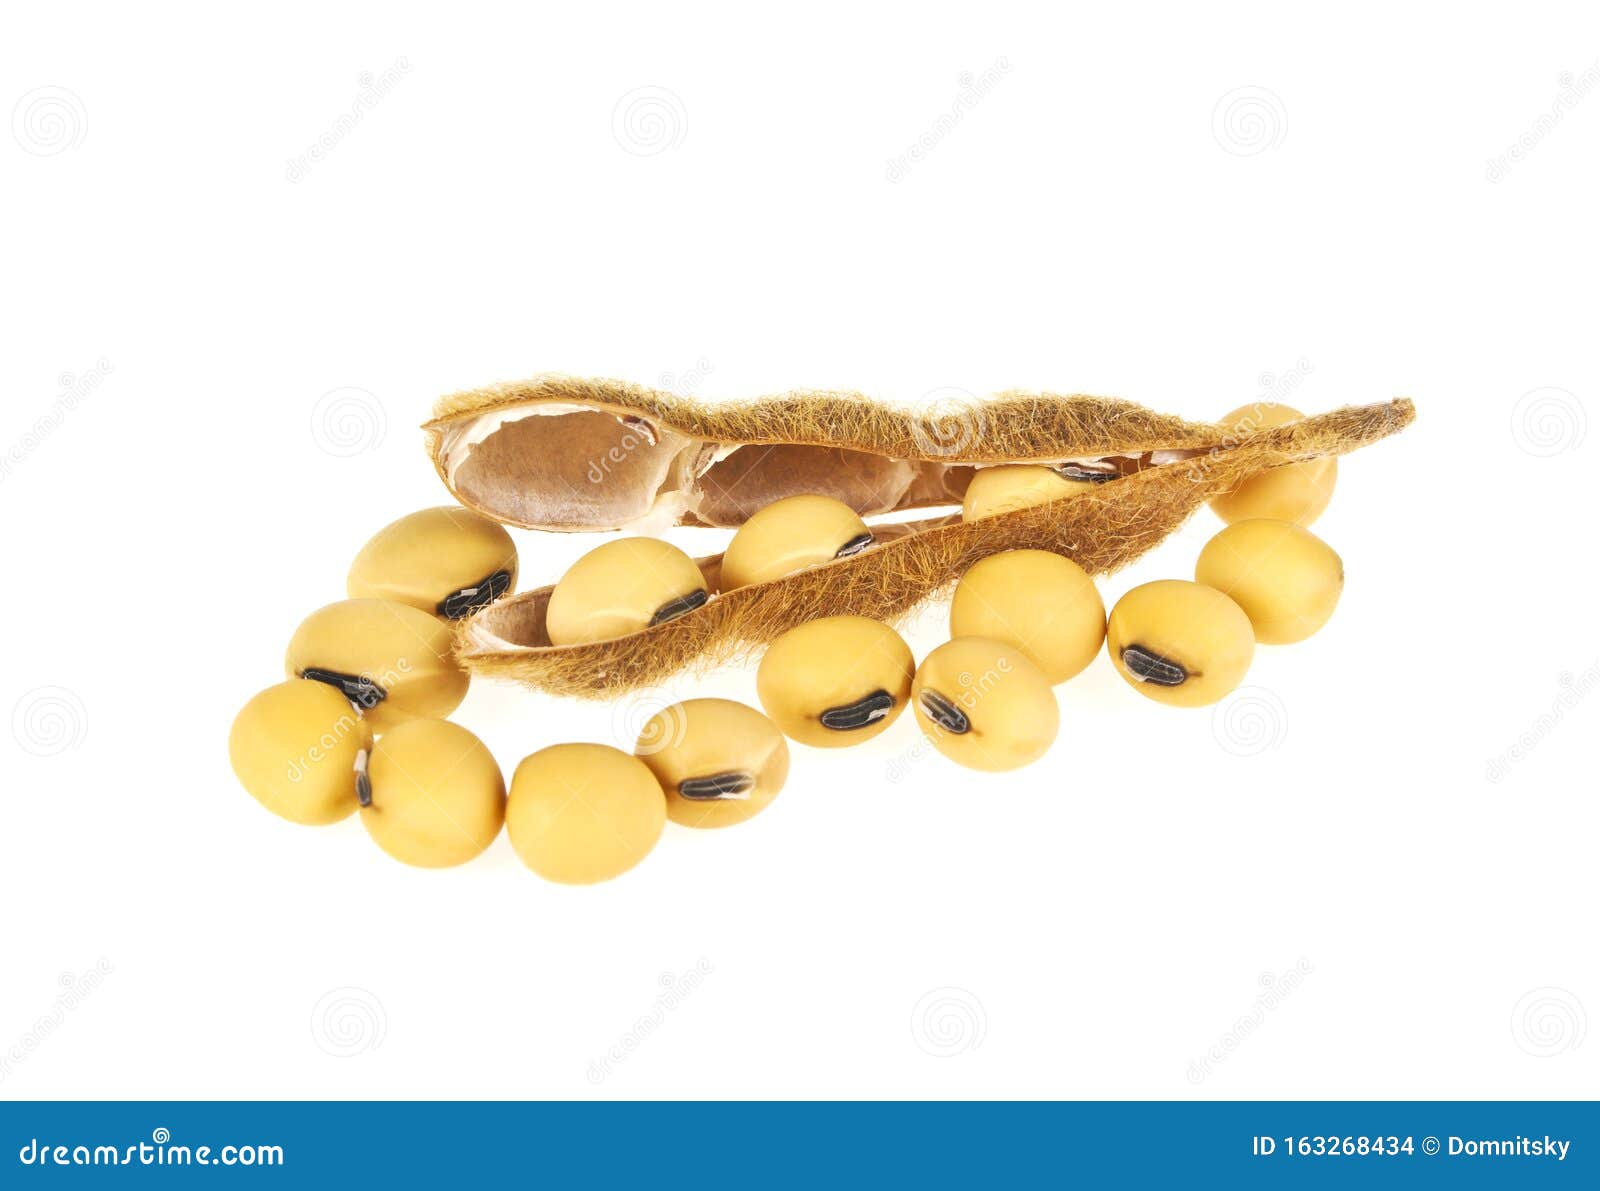 Soybean Pods Isolated on White Background. Soya - Protein Plant for ...